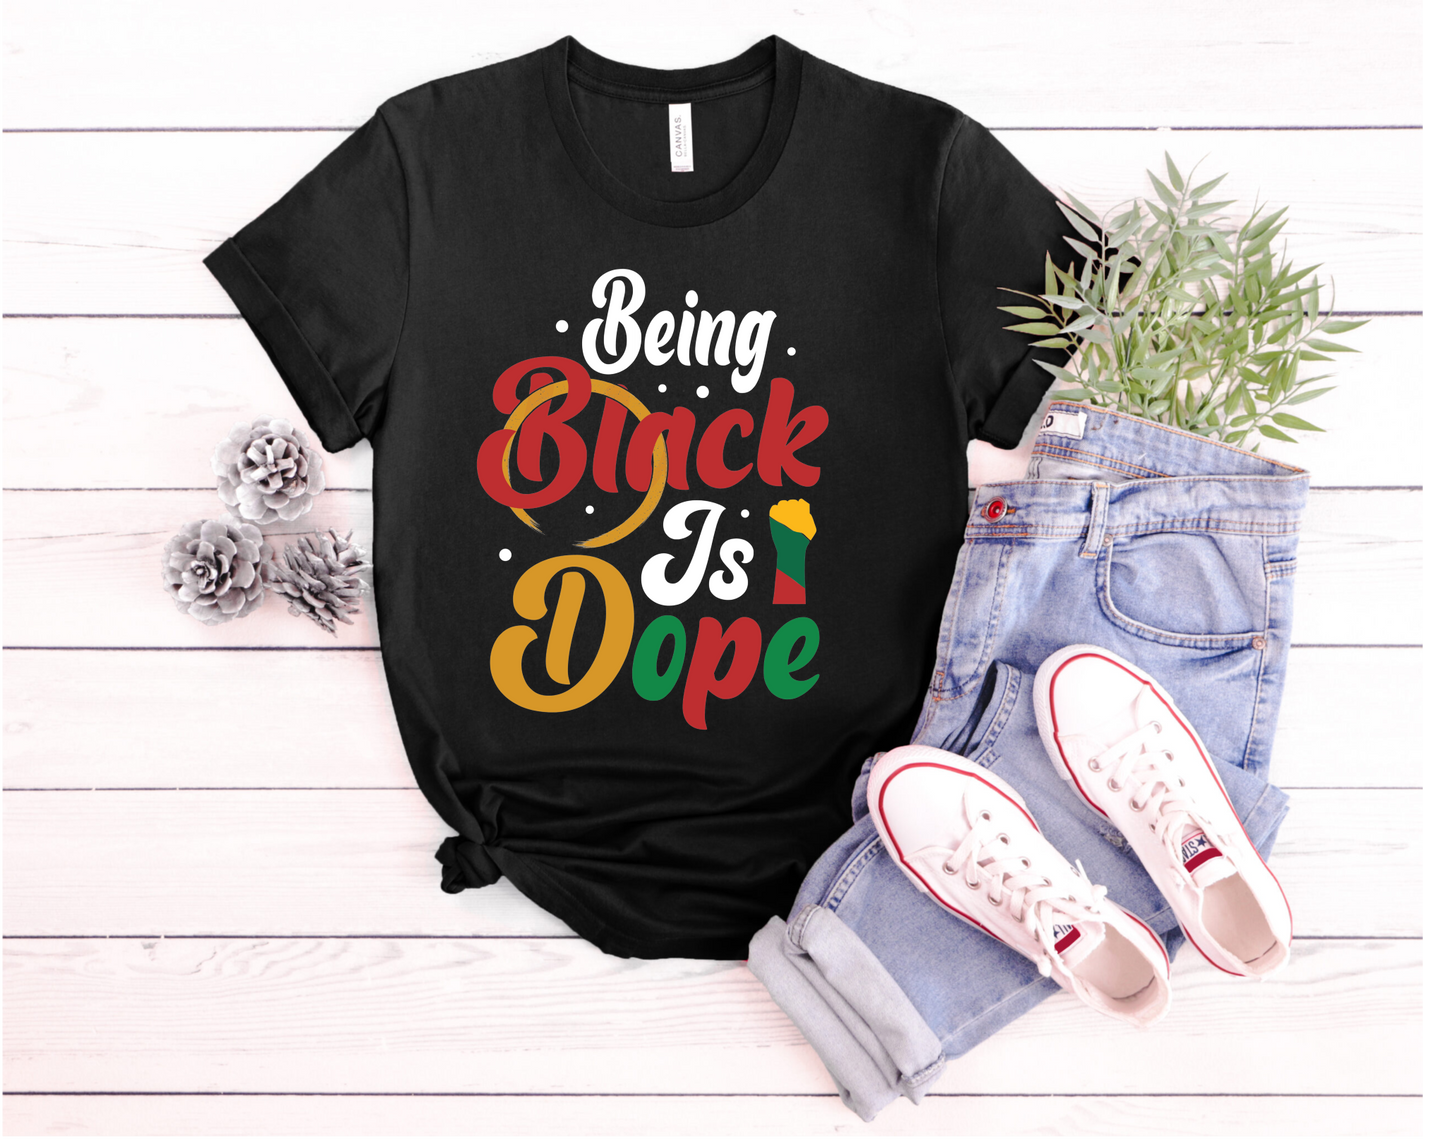 Being Black Is Dope T-shirt